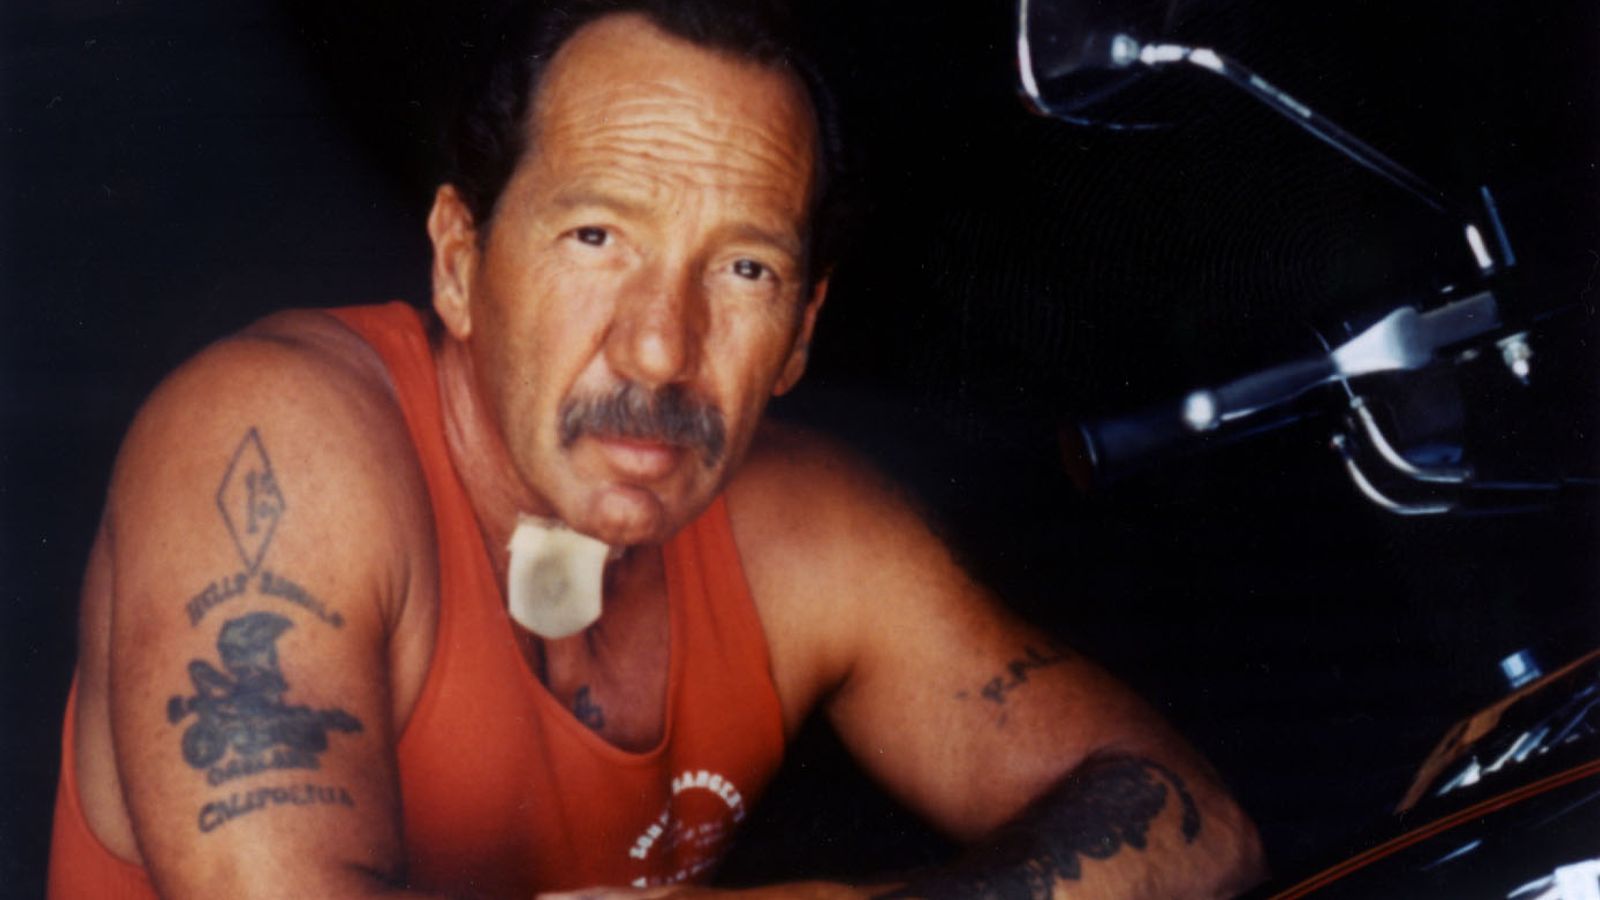 Hells Angels founding member Sonny Barger dies aged 83 following quick struggle with cancer | Ents & Arts News